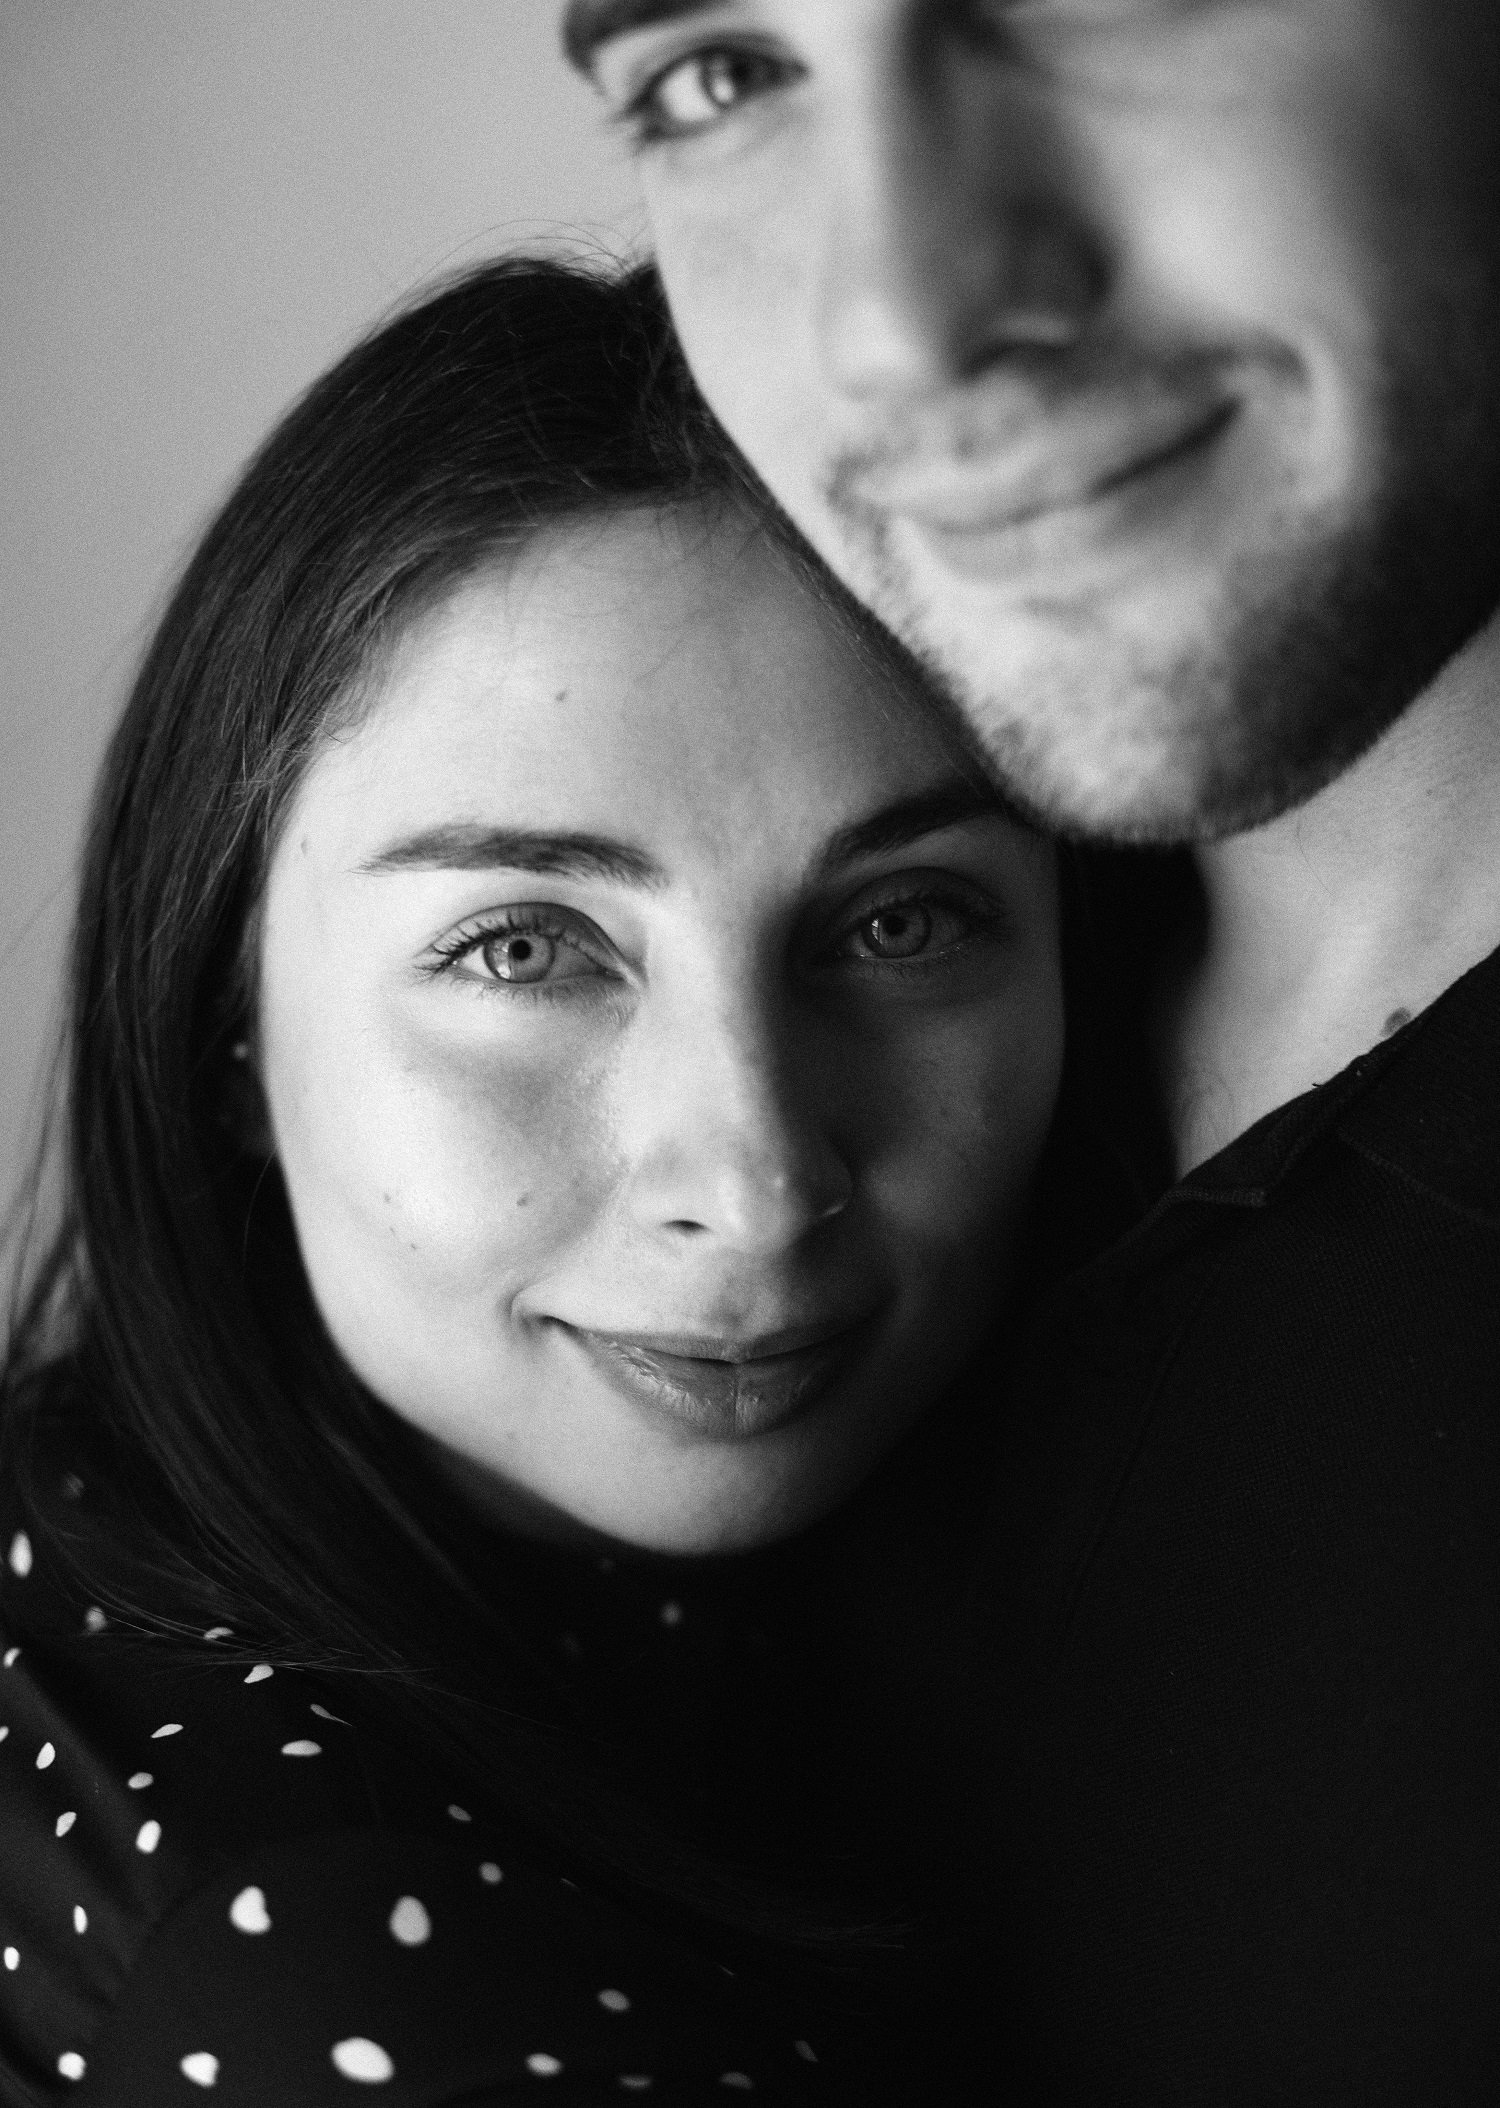 A close up photo of woman and a man